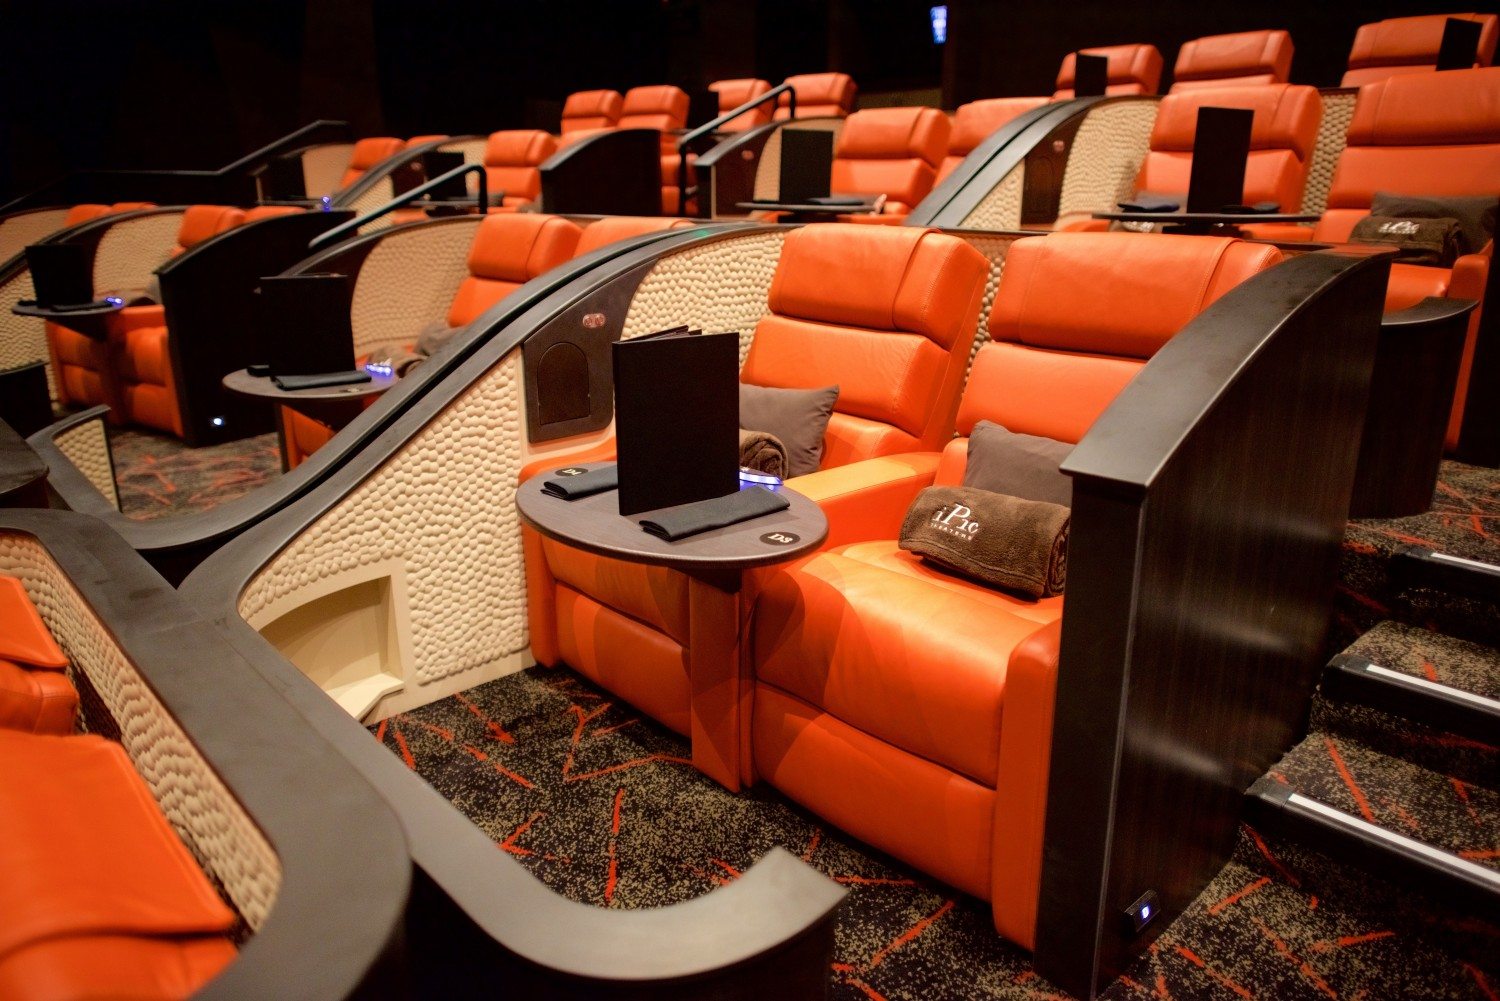 iPic now open in the South Street Seaport